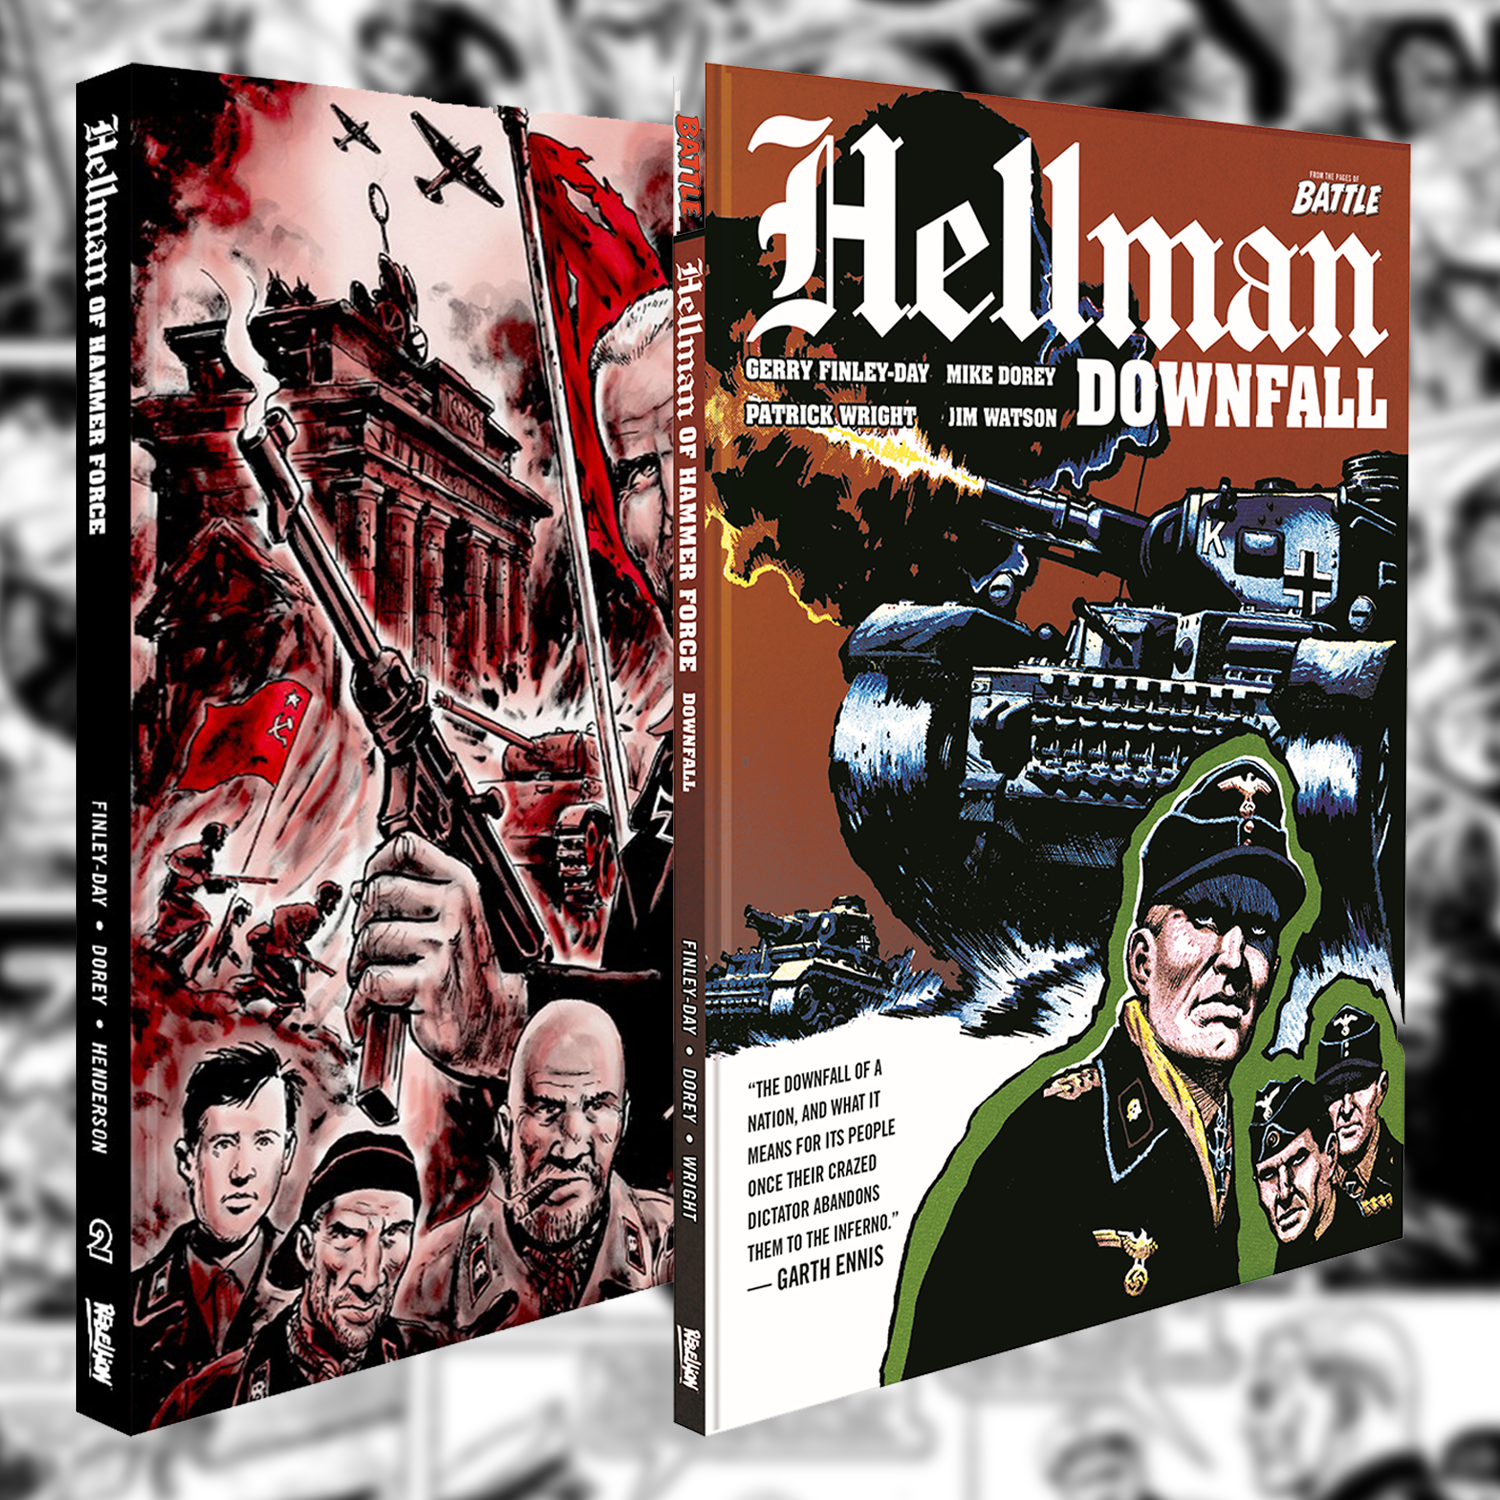 Hammer into battle with “Hellman of Hammer Force: Downfall” – pre-order now!